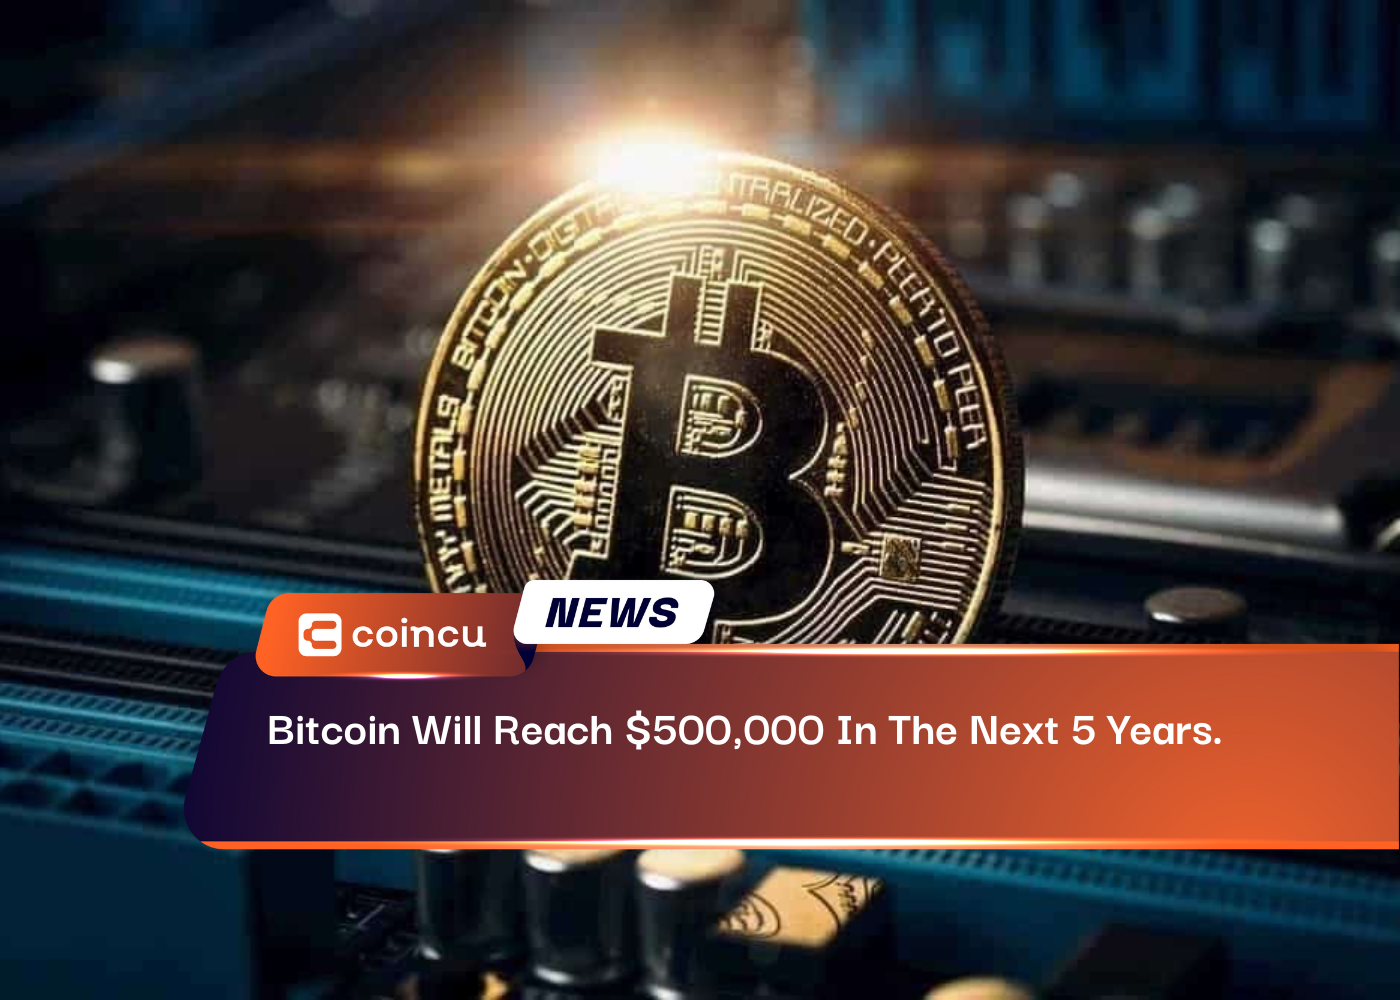 Bitcoin Will Reach $500,000 In The Next 5 Years.